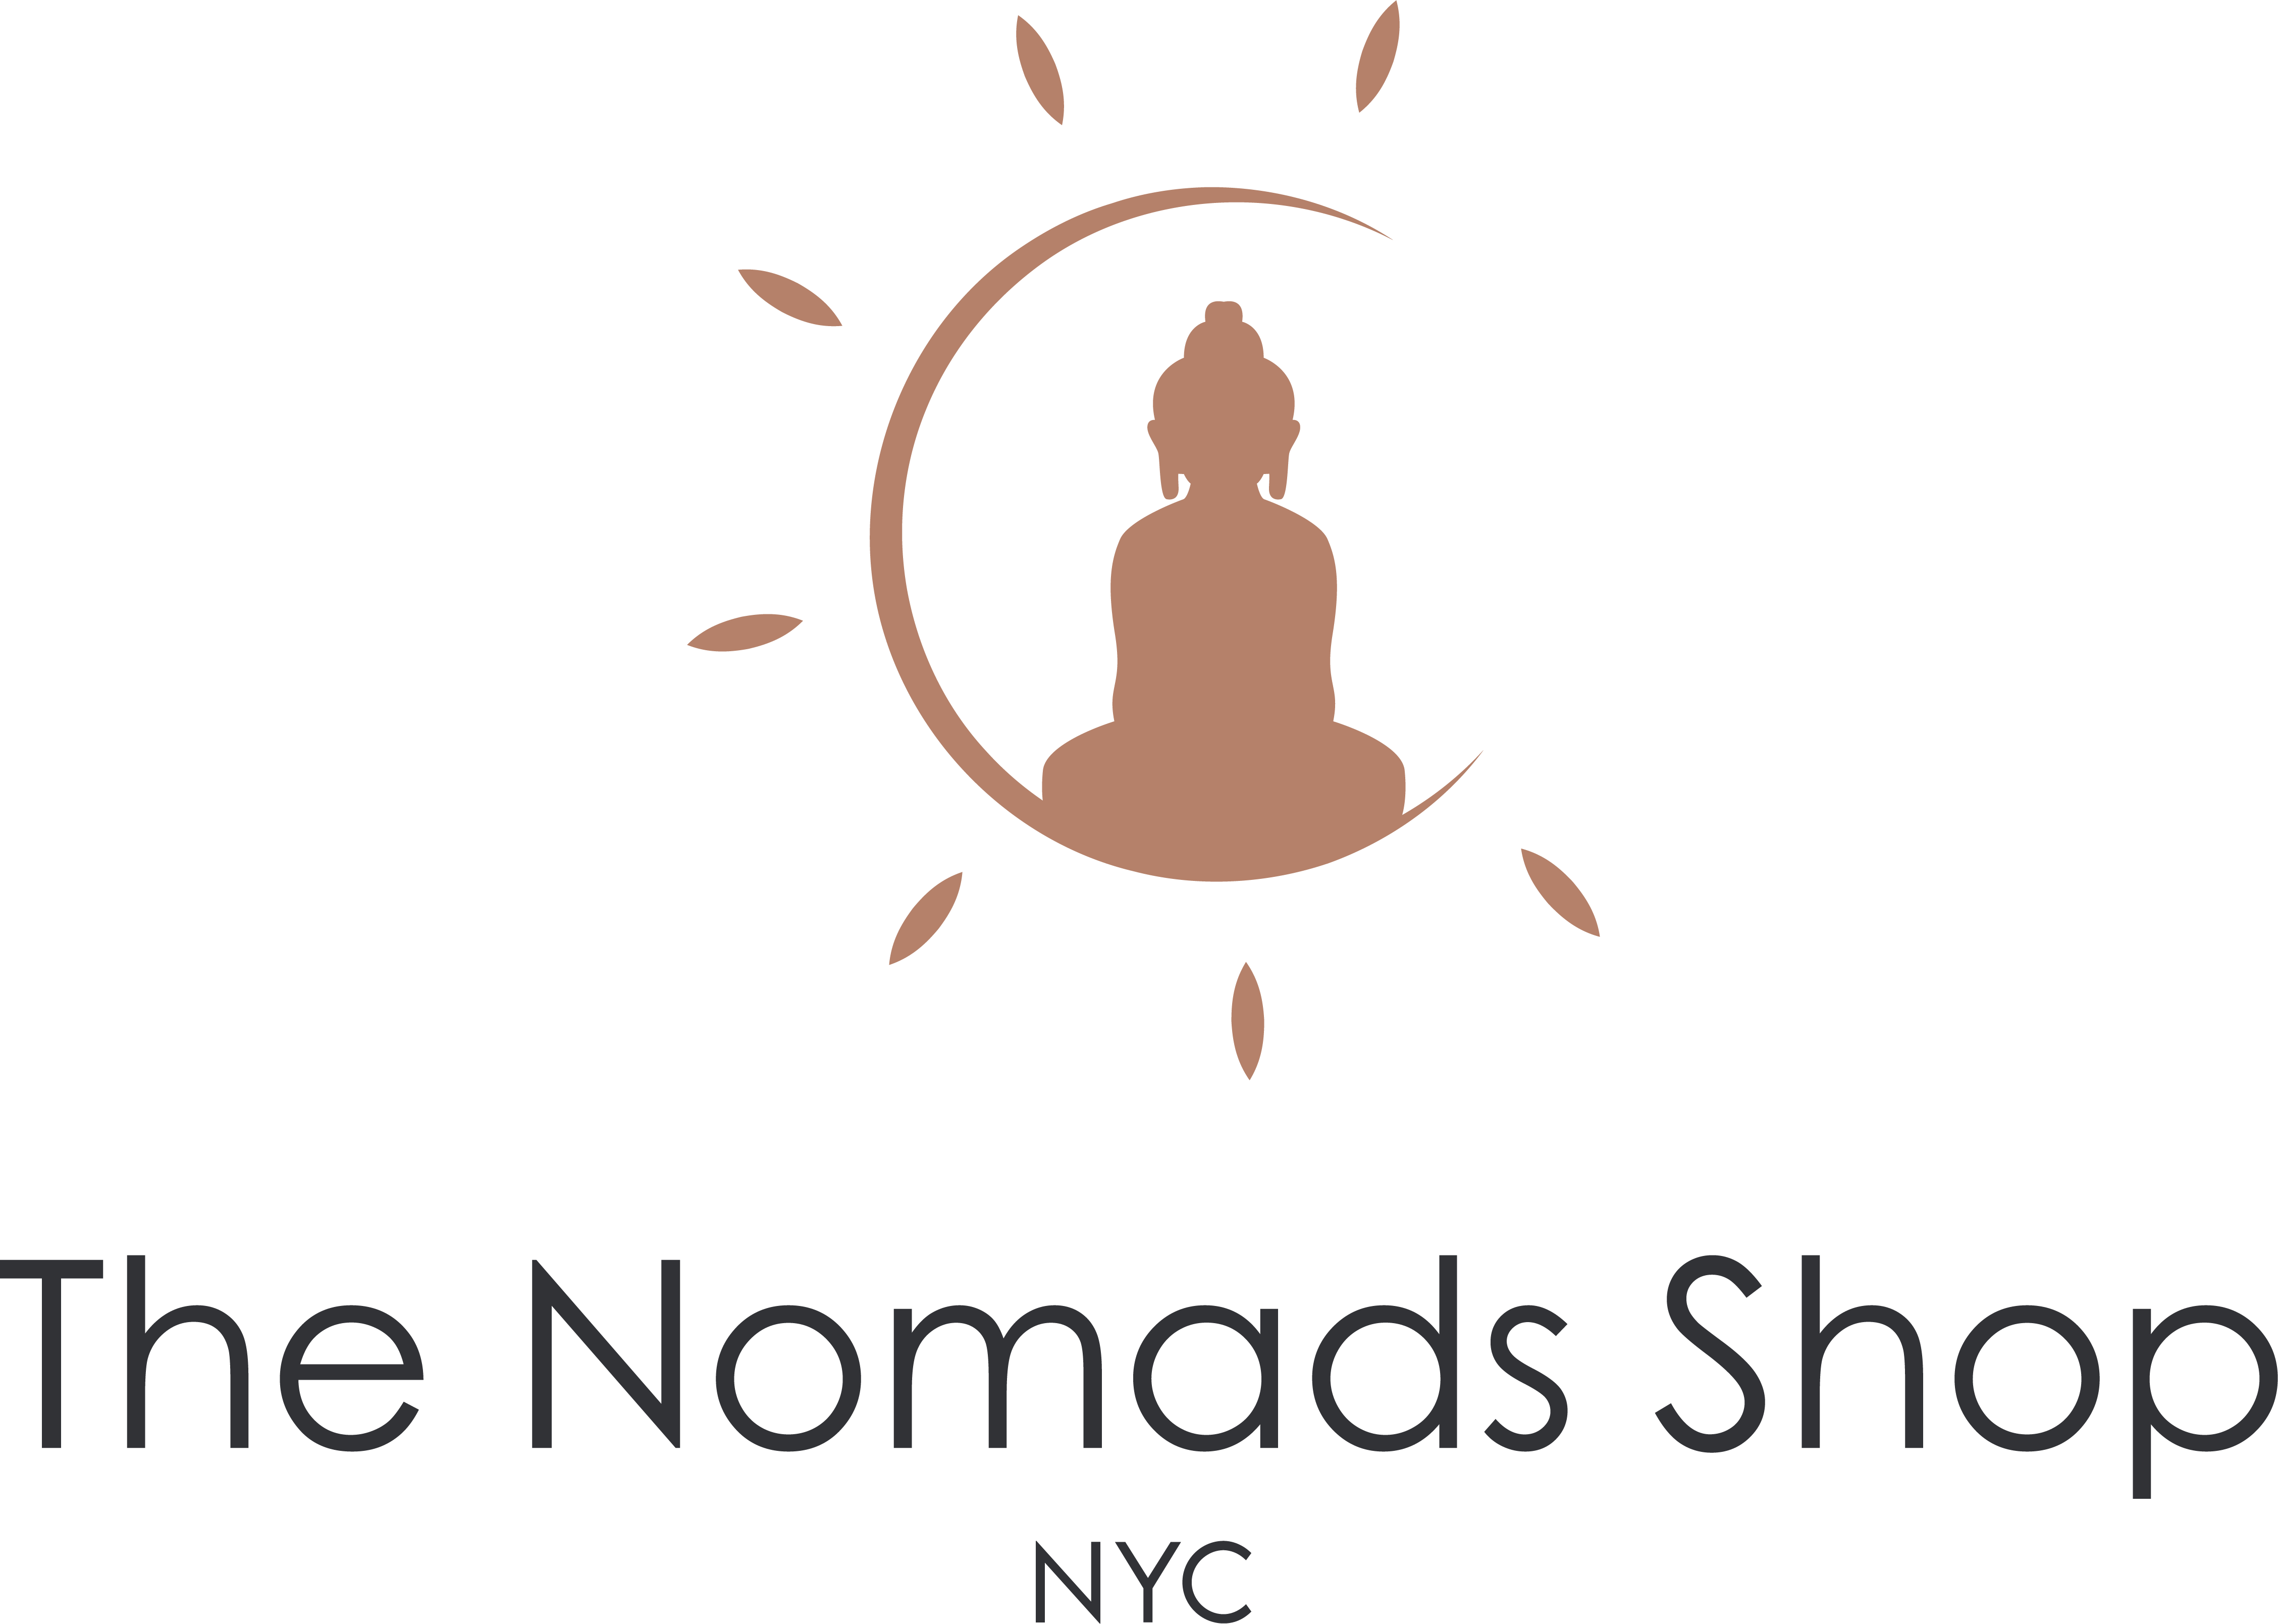 The Nomads Shop NYC